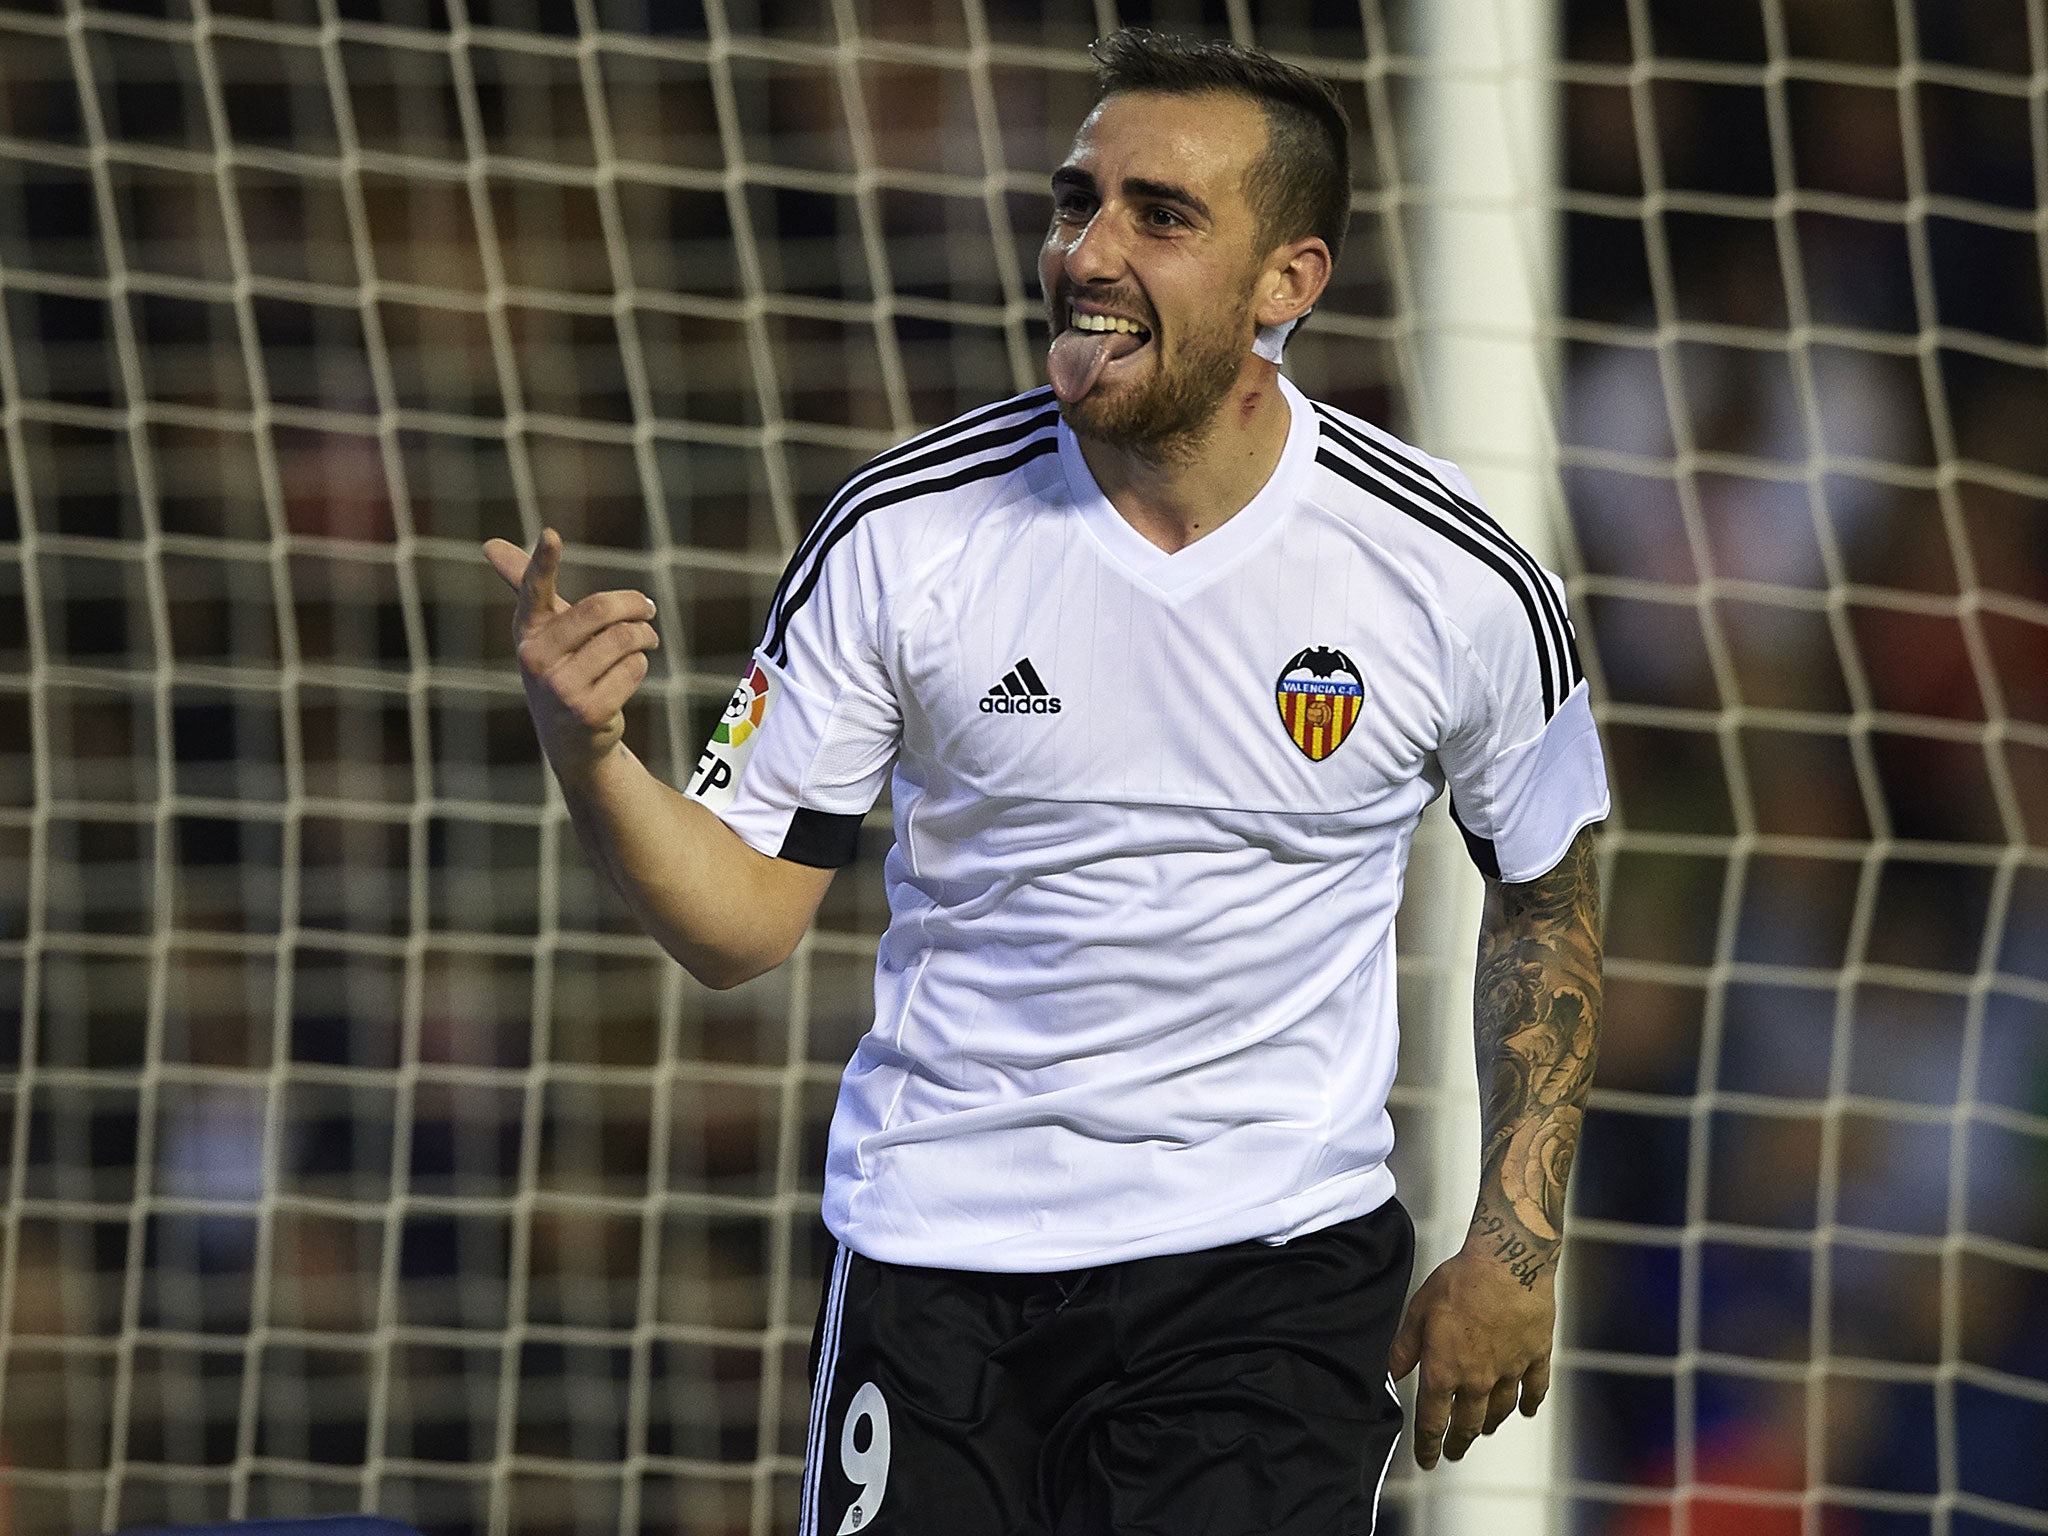 Paco Alcacer celebrates heading Valencia’s equaliser with seven minutes to go at the Mestalla